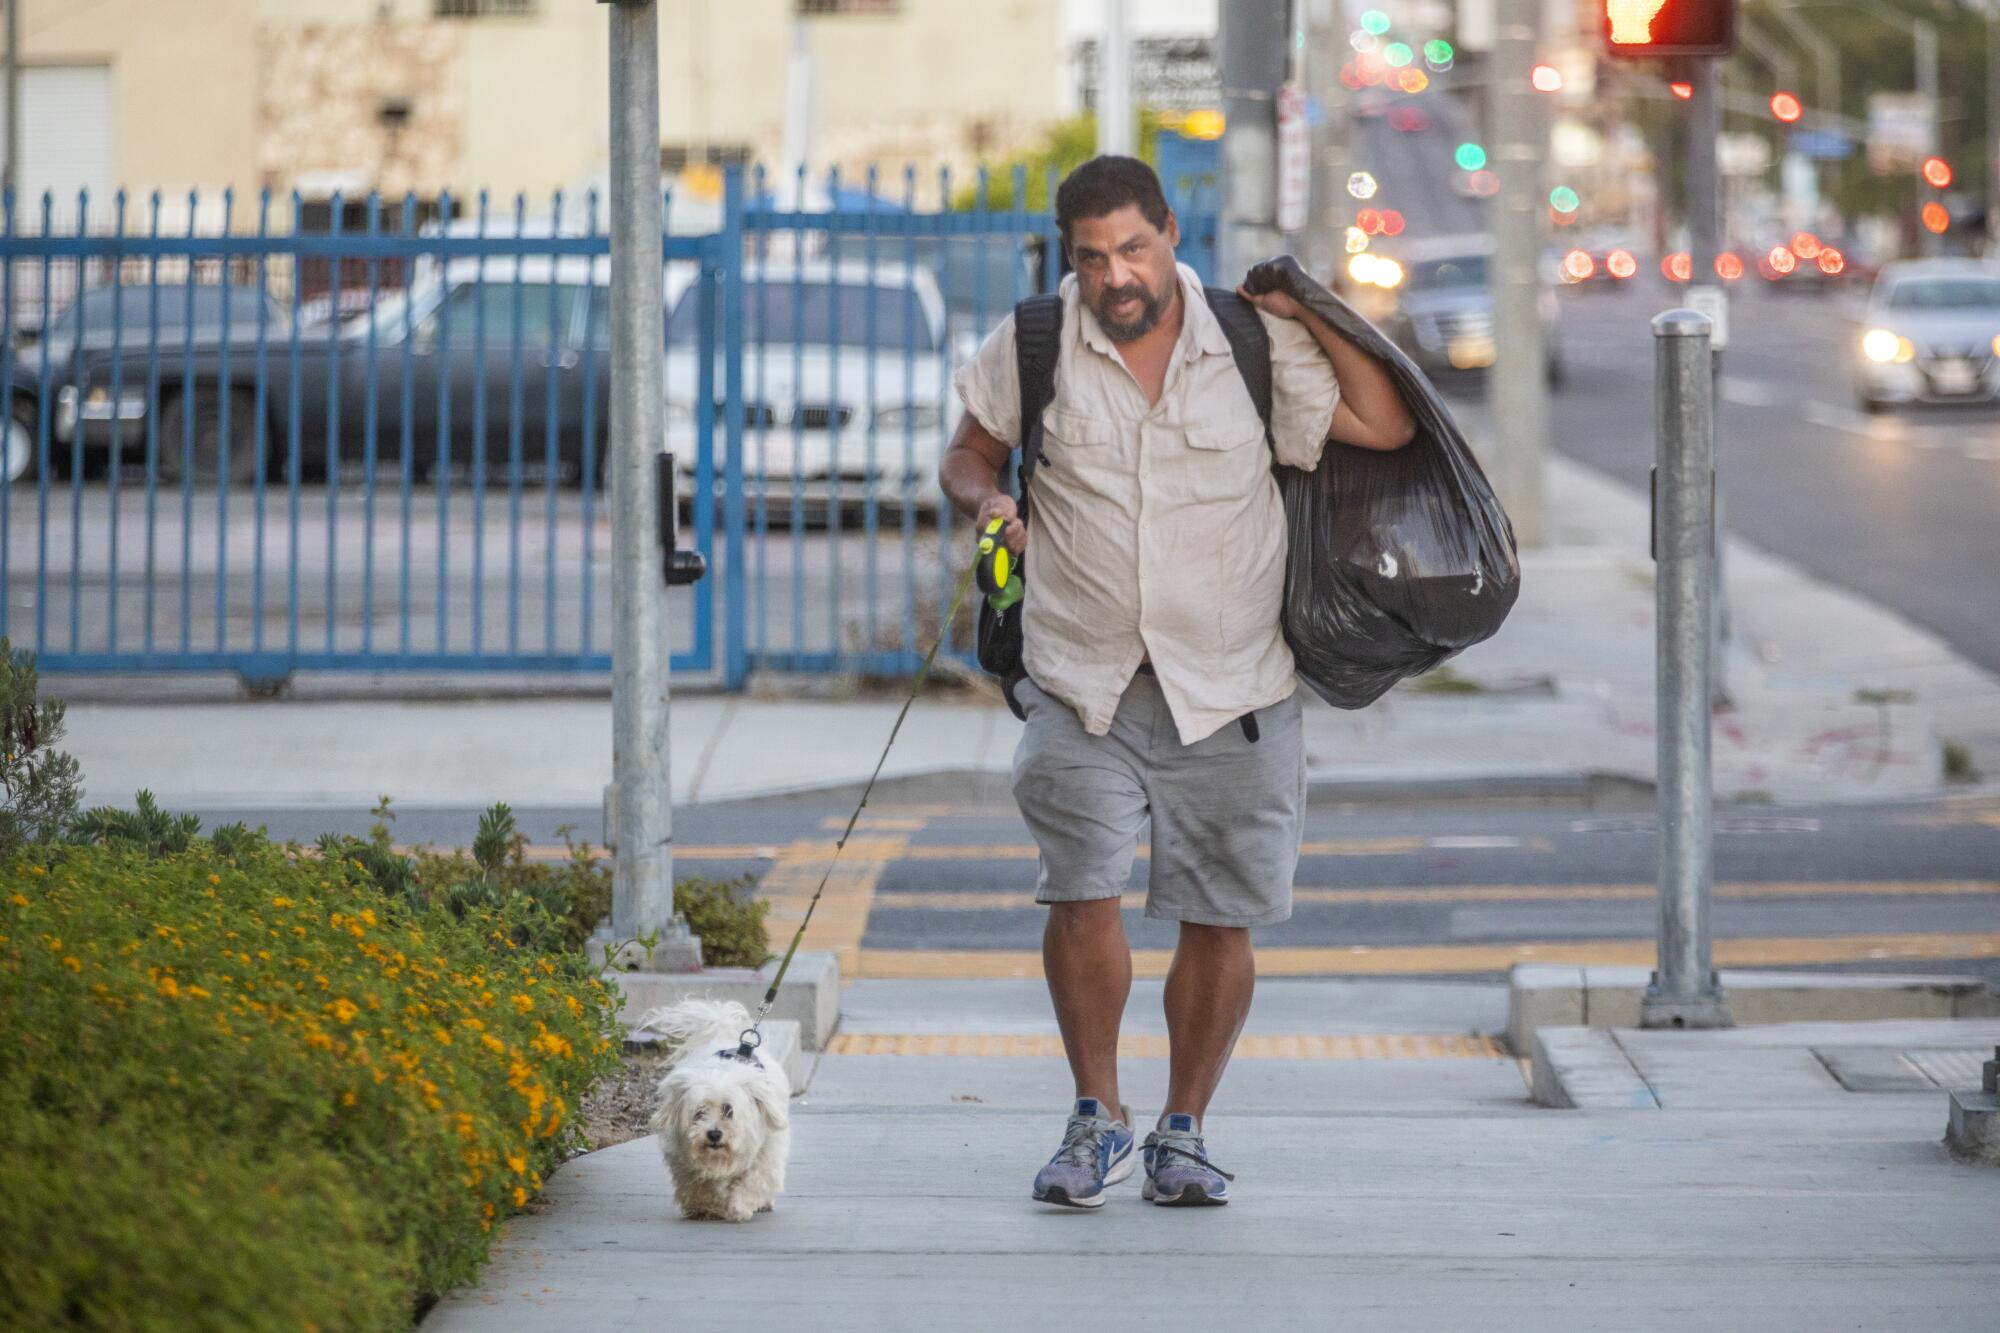 A man walks with a dog and carries a garbage bag